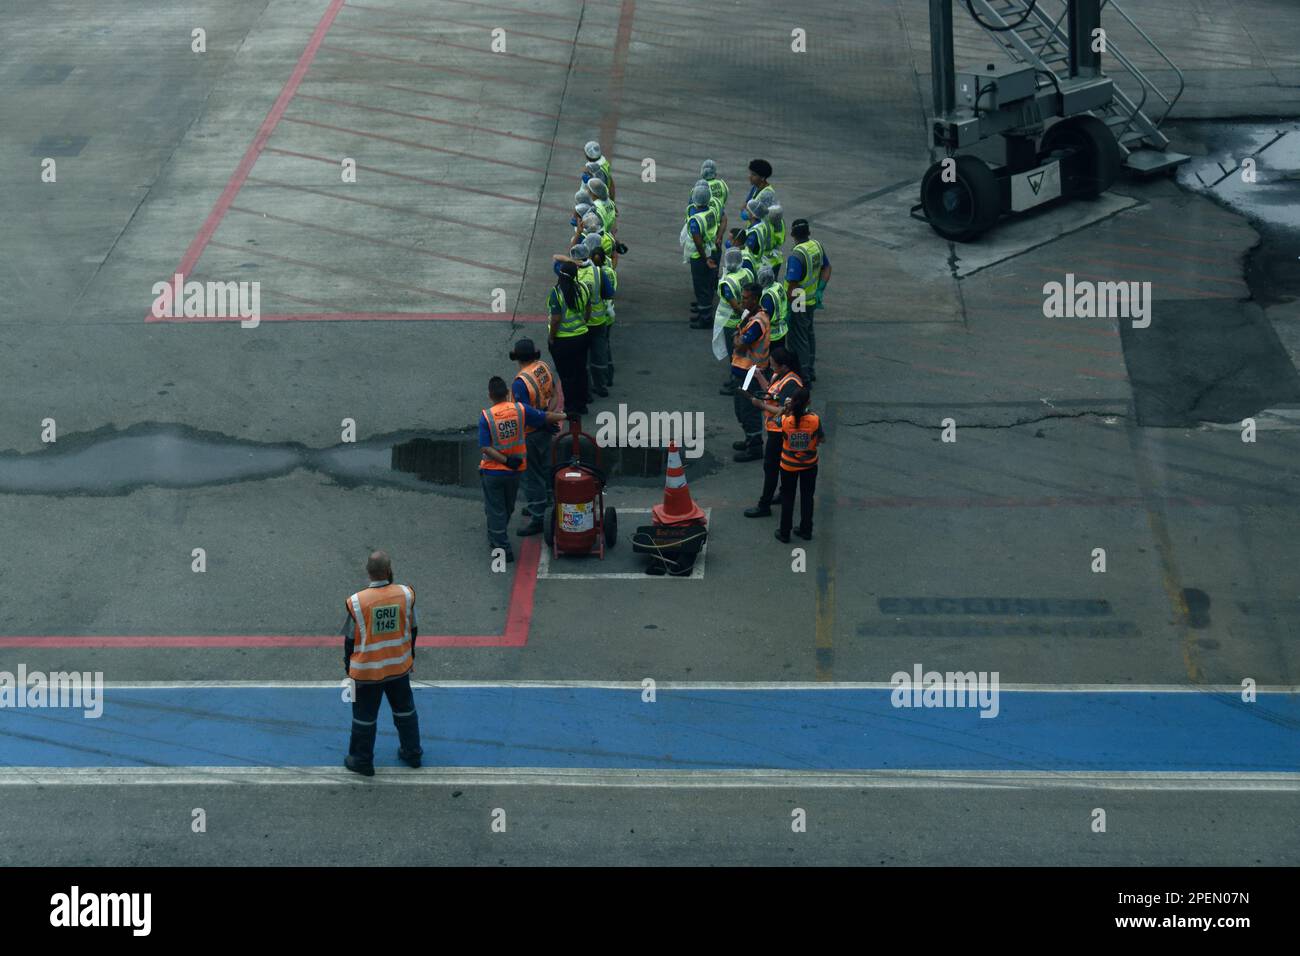 Aircraft Cleaning and re-fueling Crews waiting on the tarmac for aircraft arrival. Wearing safety reflective safety vests. Sao Paulo/Guarulhos Airport Stock Photo